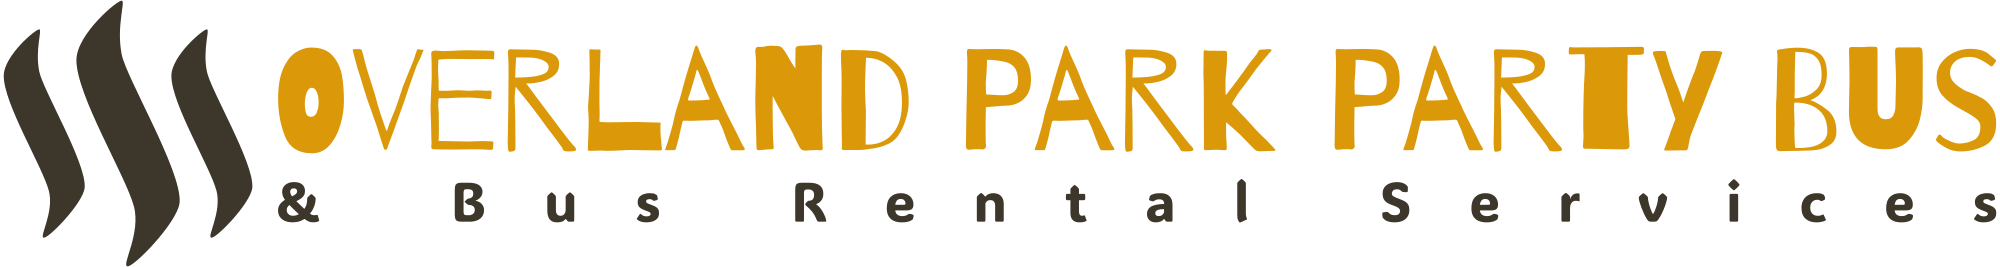 Overland Park Party Bus logo